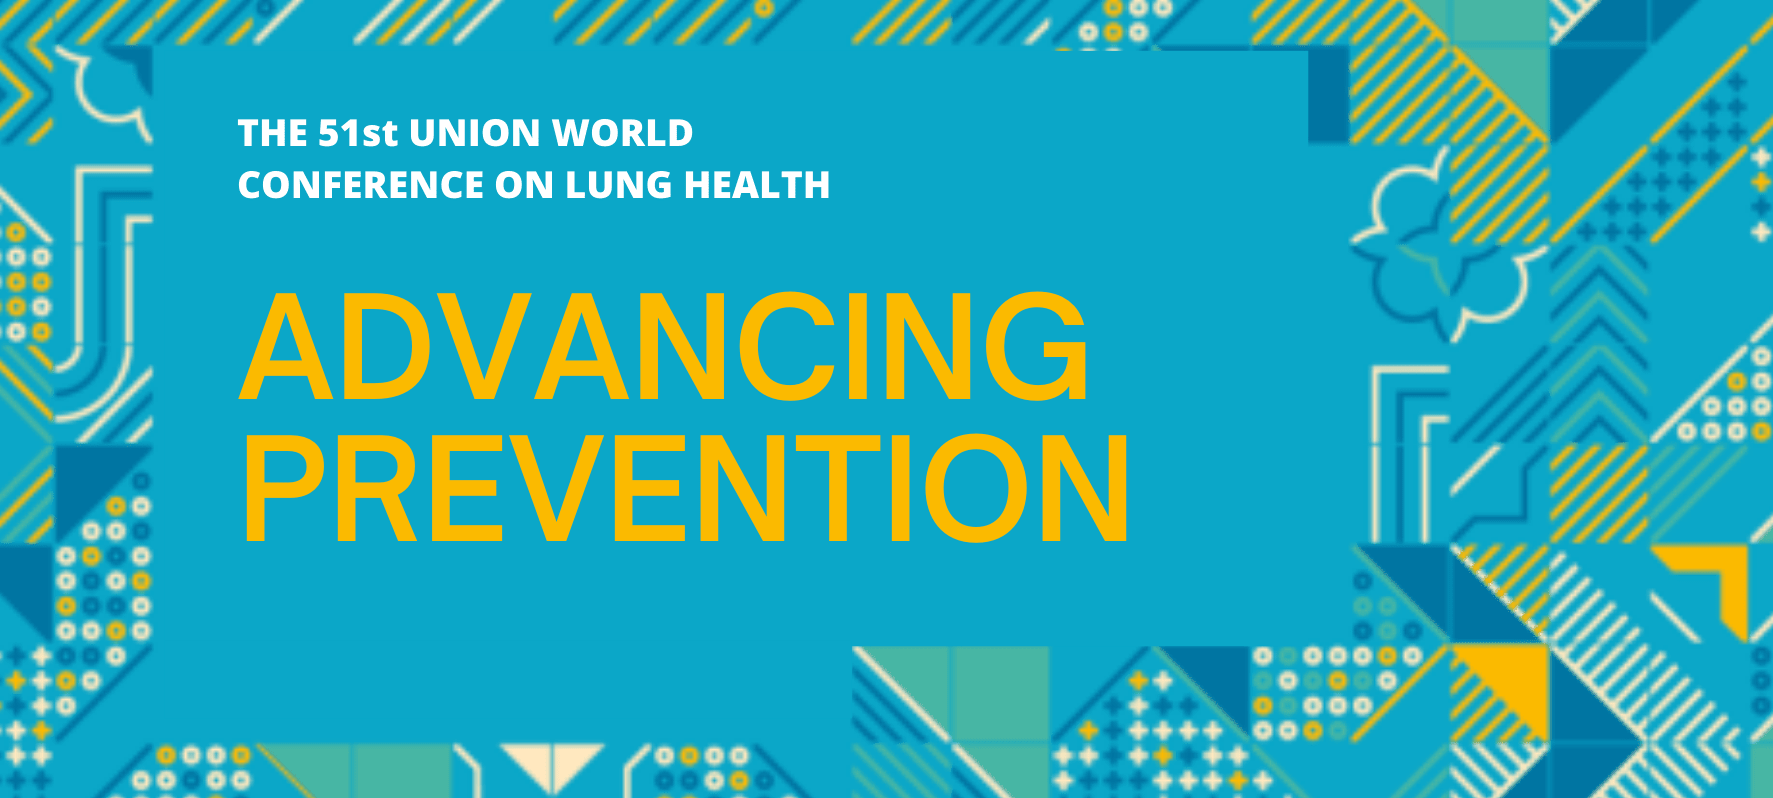 the 51 union world conference on lung health